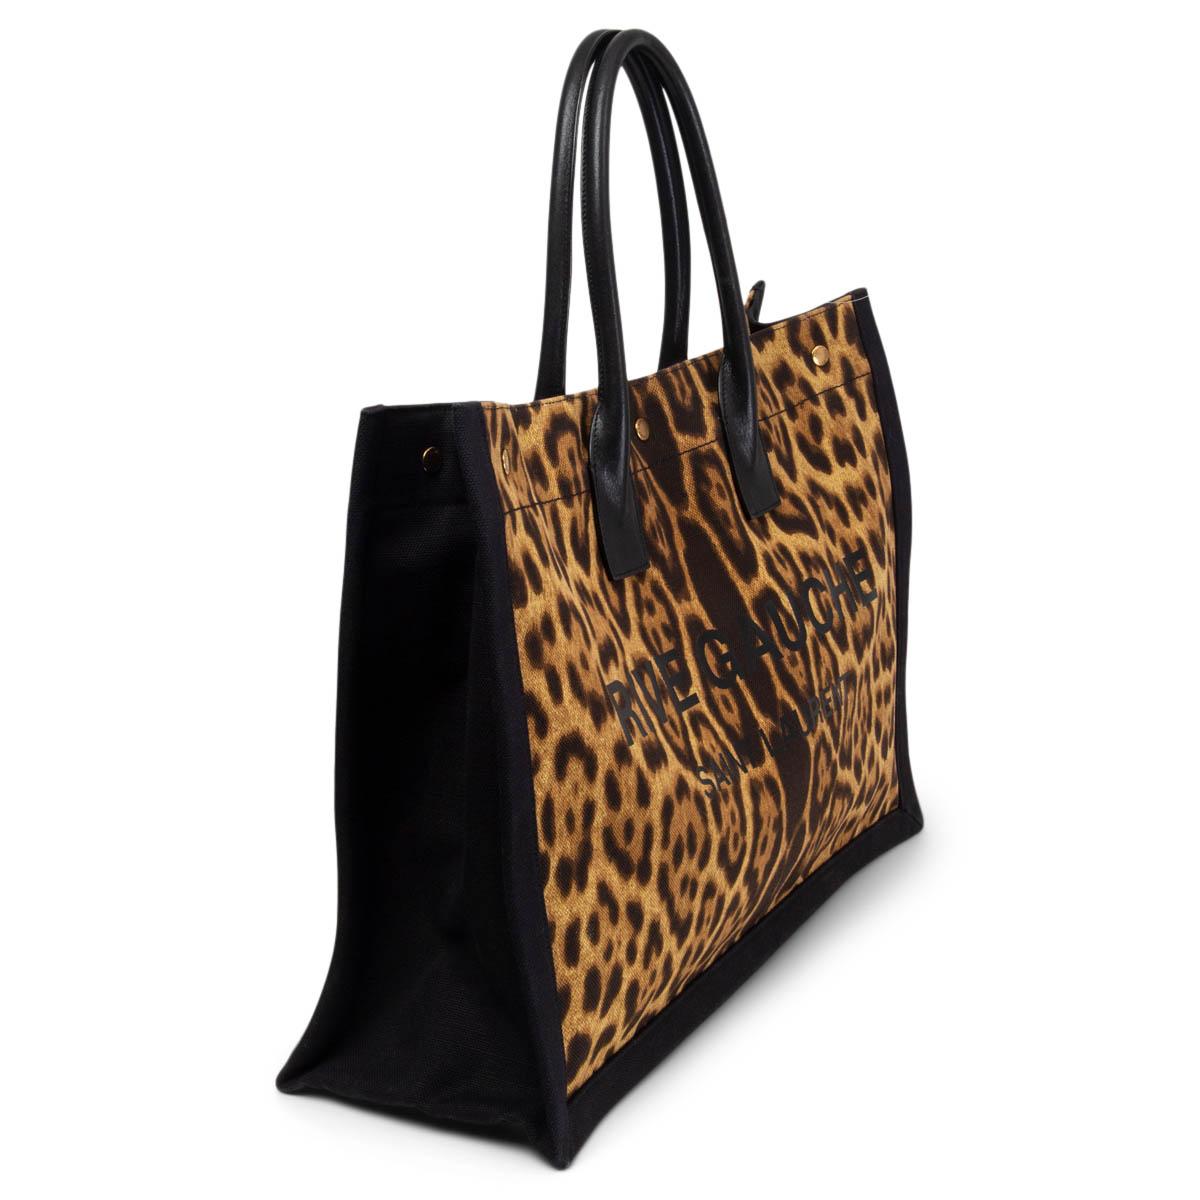 100% authentic Saint Laurent Canvas Leopard Print Rive Gauche Tote in brown, beige and black canvas with calfskin handles. Opens with a push button and is lined i black canvas with one big zipper pocket against the back. Has been carried and is in